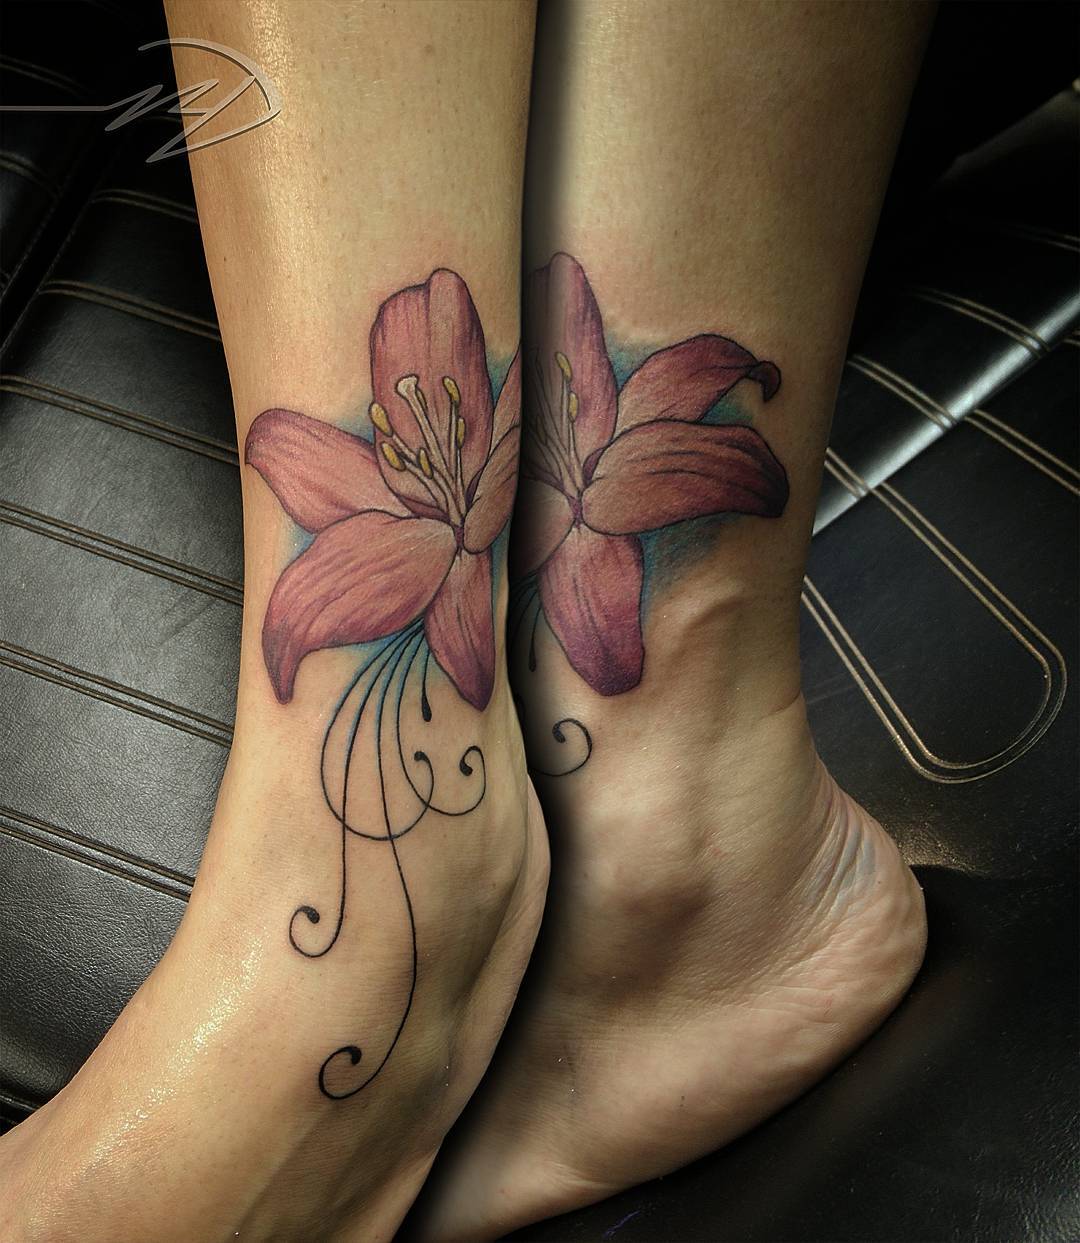 Tattoos Ideas For Ankle | Daily Nail Art And Design